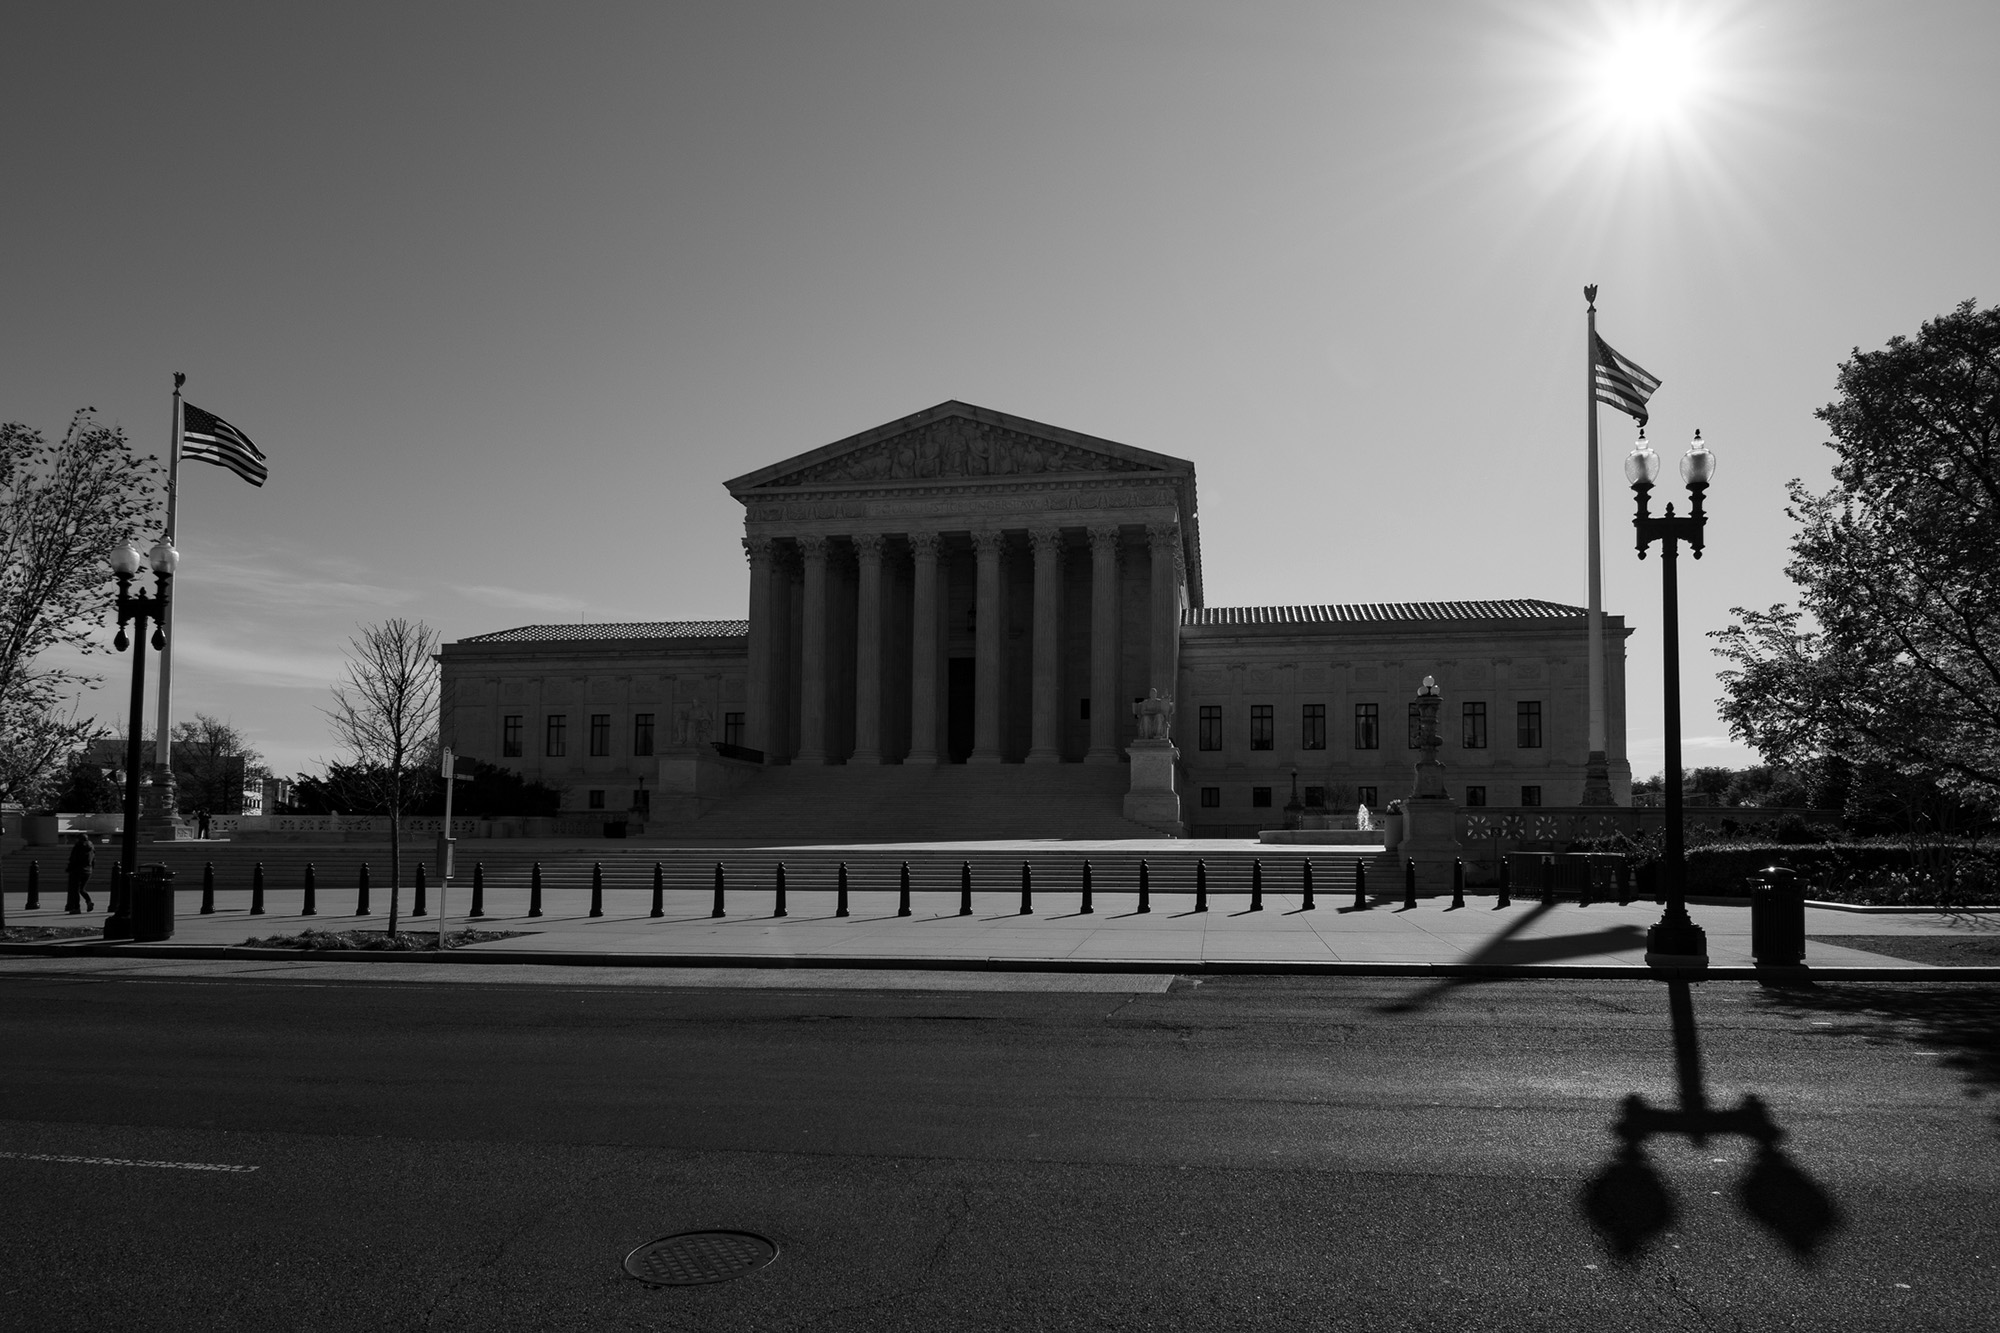 1 in 3 Americans Might Consider Abolishing or Limiting Supreme Court,